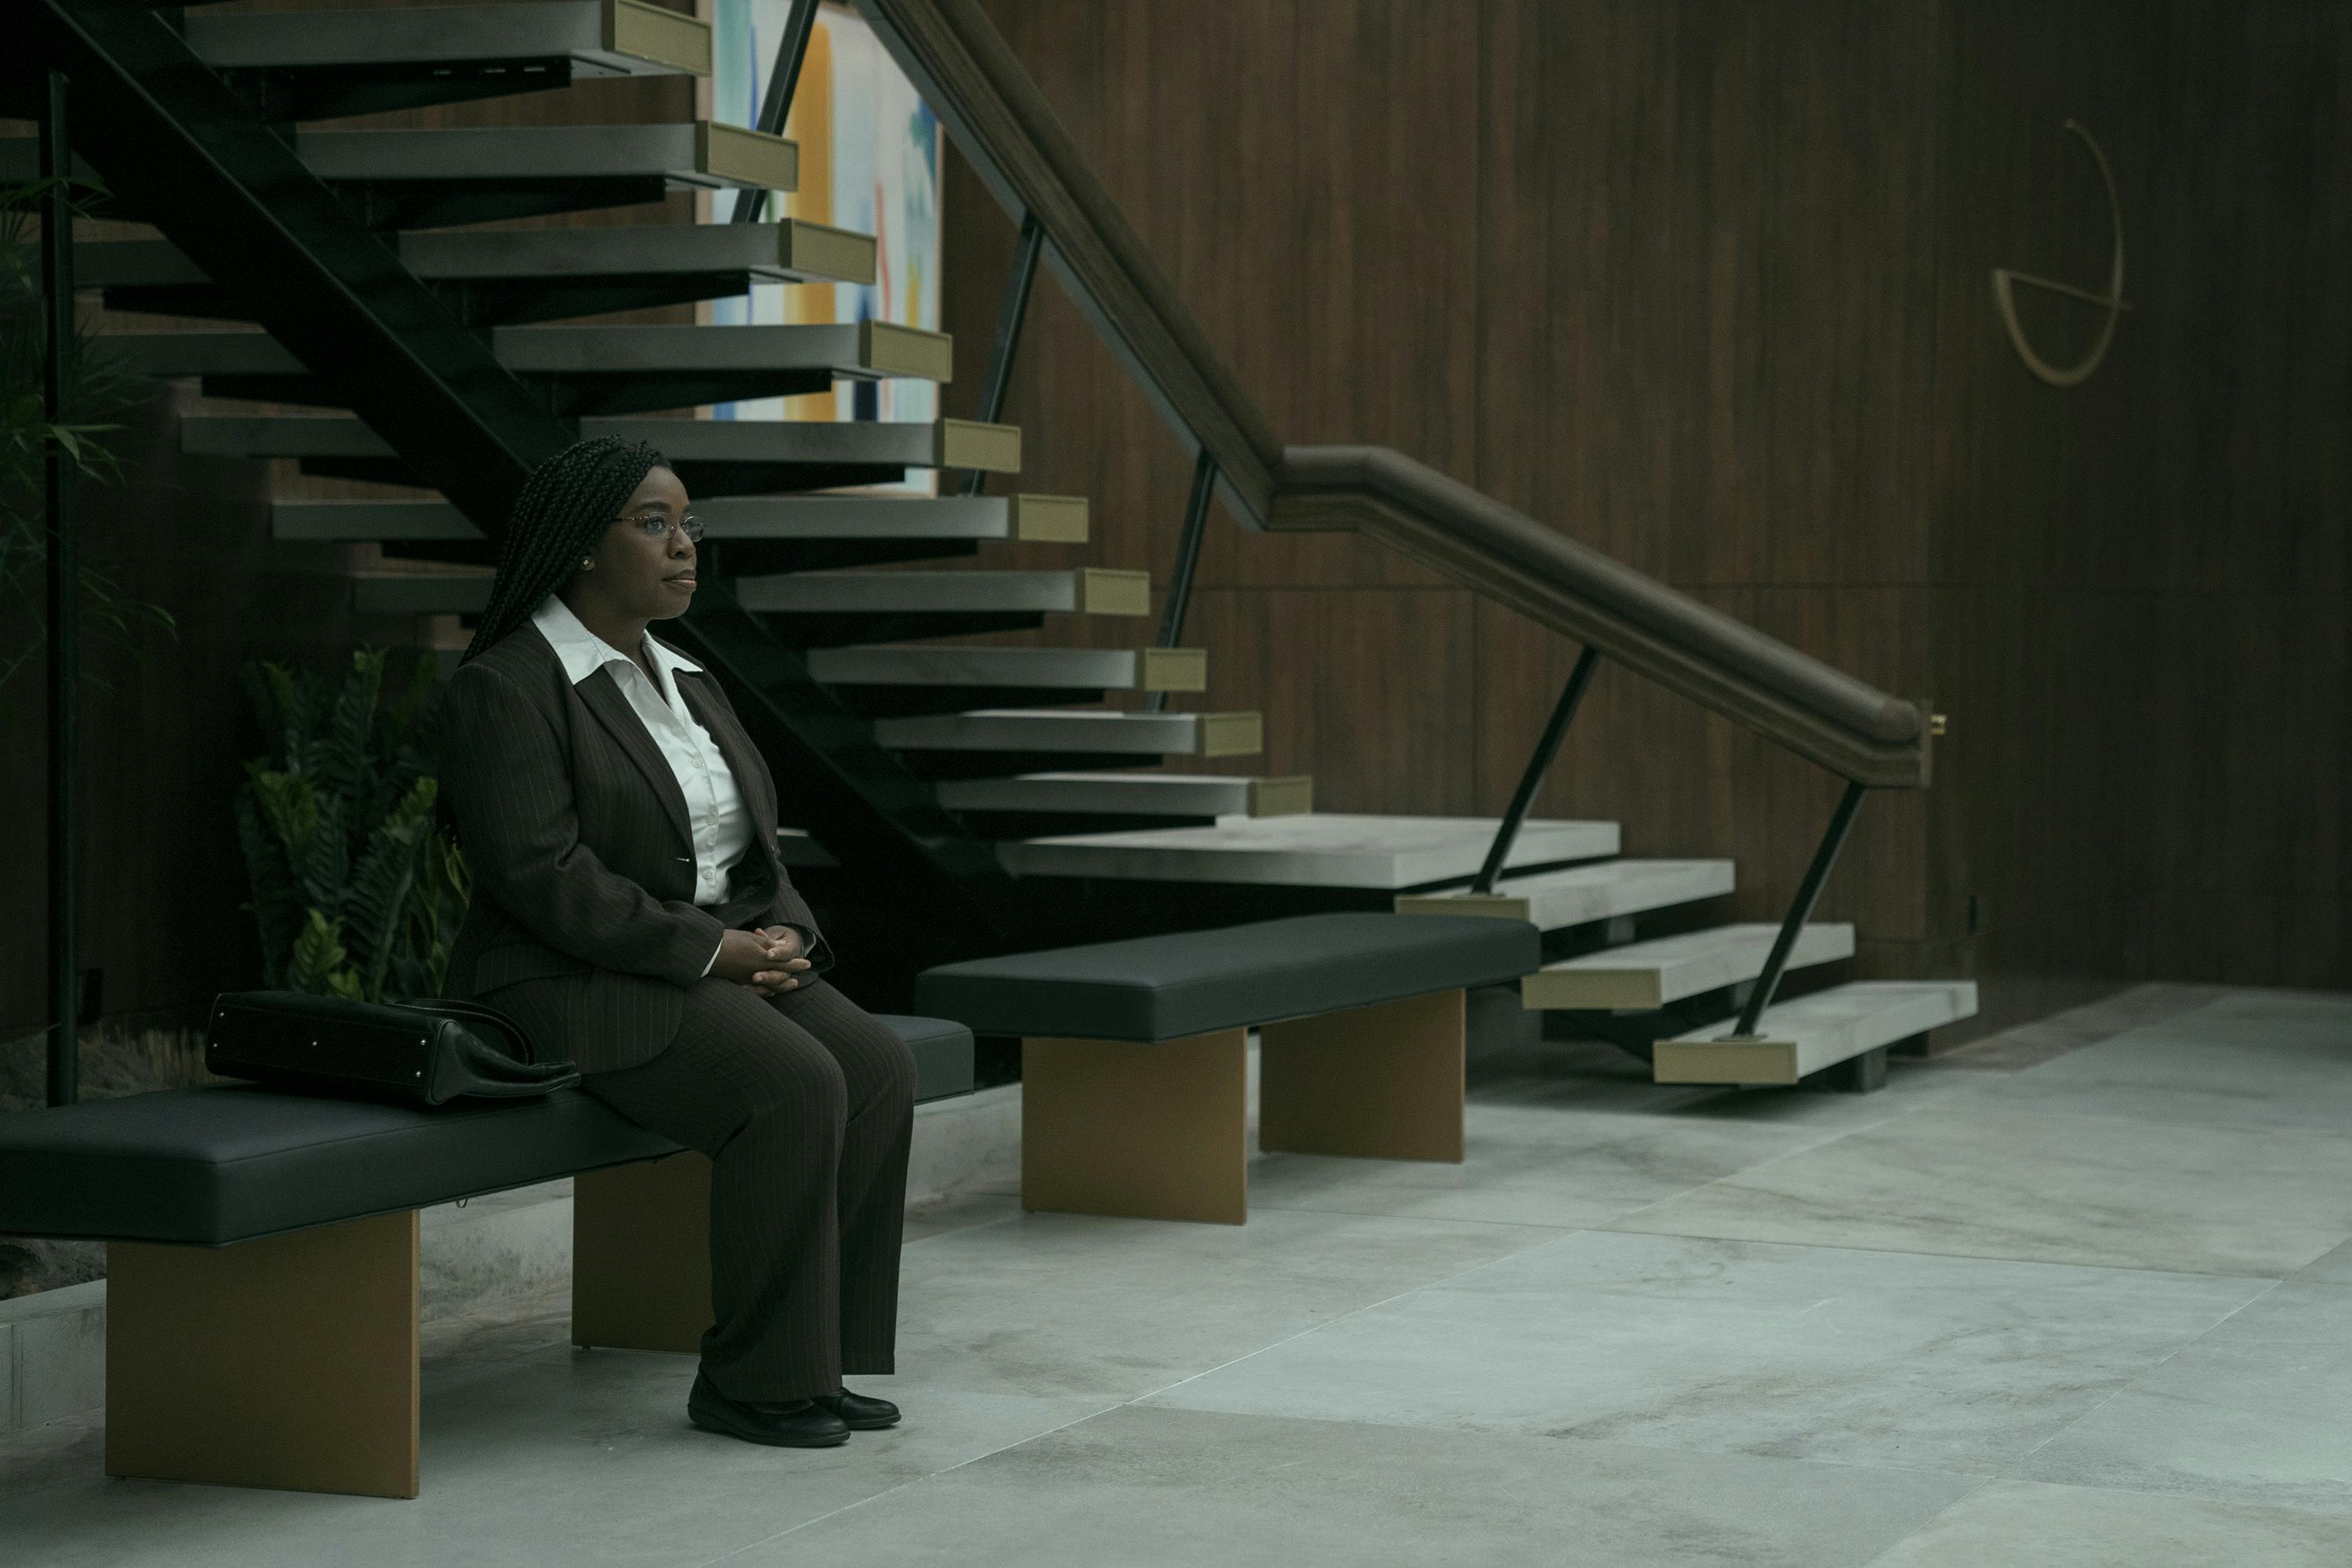 Edie Flowers (Uzo Aduba) sits on a bench. She wears a brown suit and a white shirt with a pointy collar and has extremely good posture. Behind her is a staircase that looks like it's made of Jenga blocks.